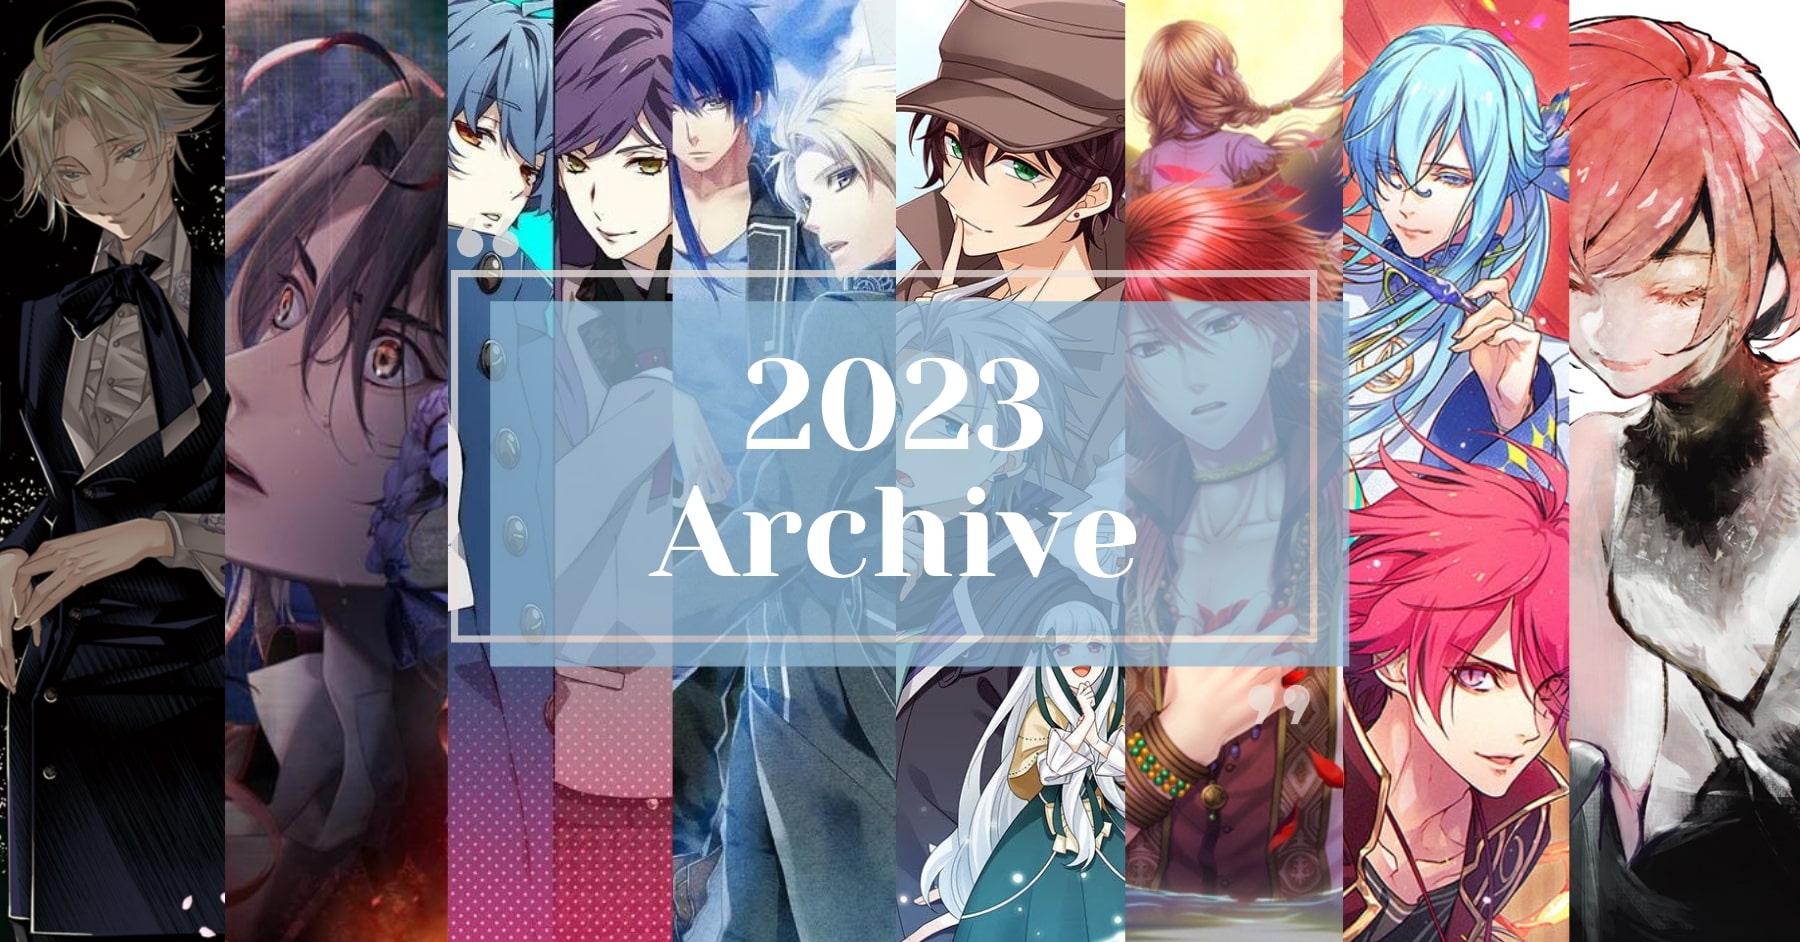 Archived — I play too many otome games